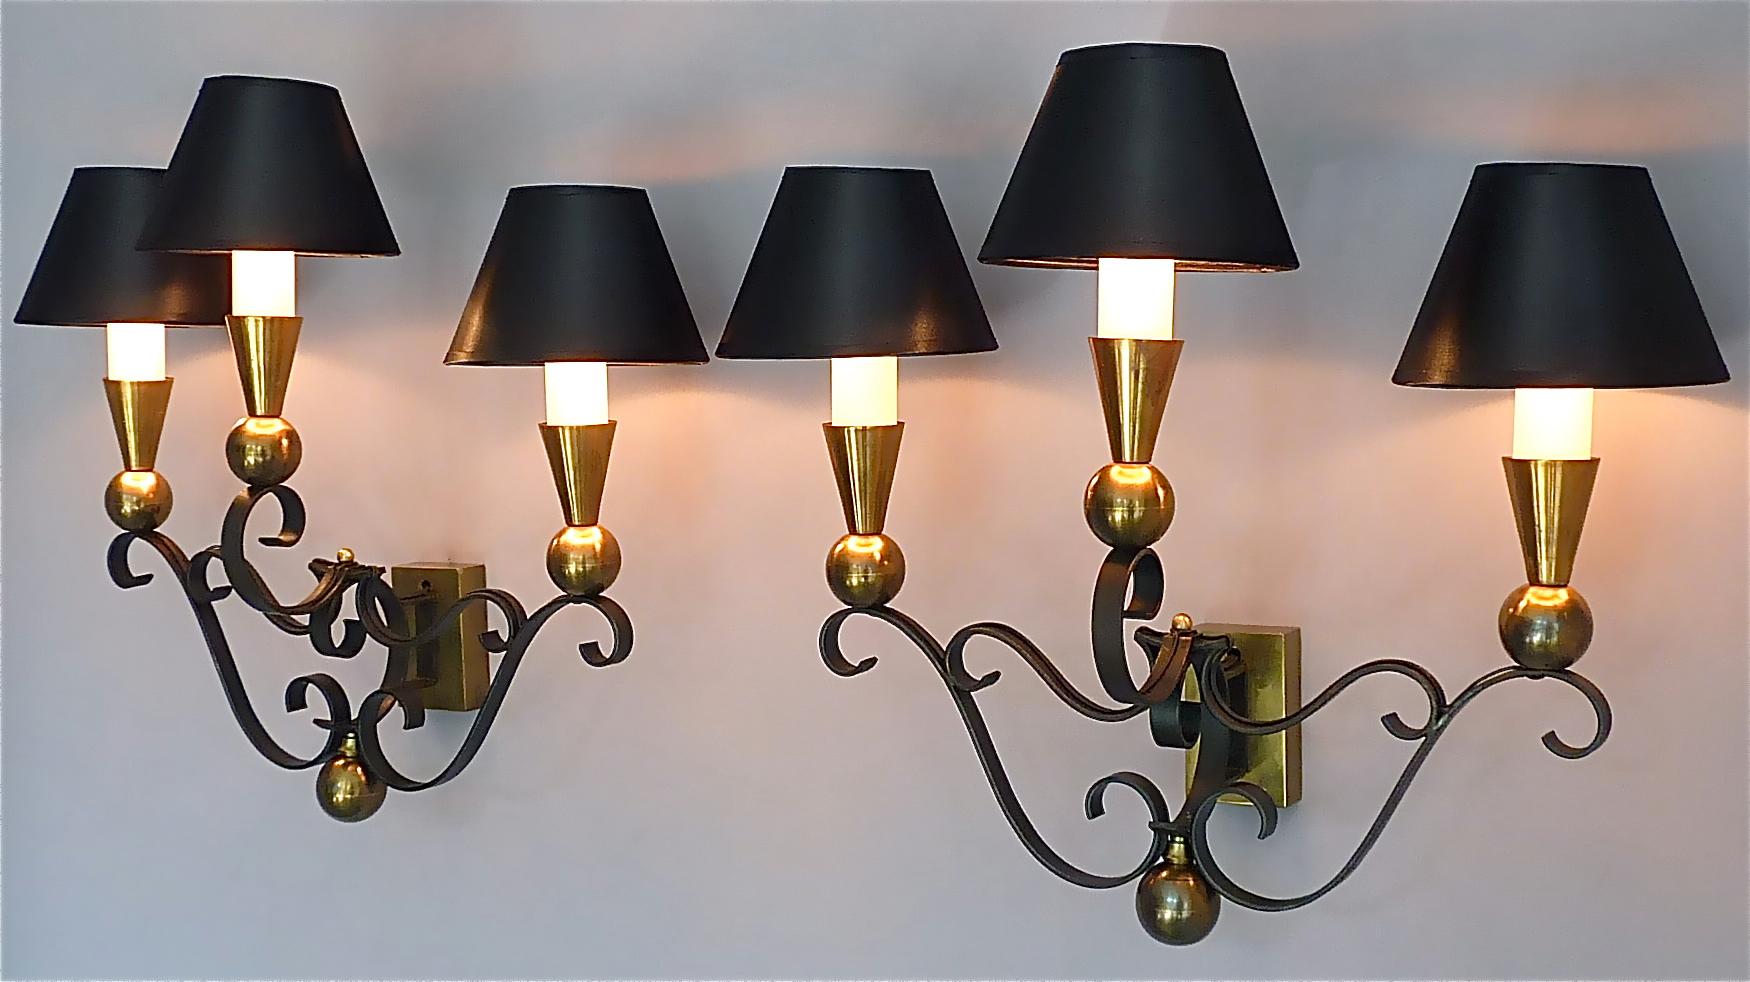 3 Rare Sconces Poillerat Adnet Style Black Forged Iron Brass Gold France 1950s For Sale 13